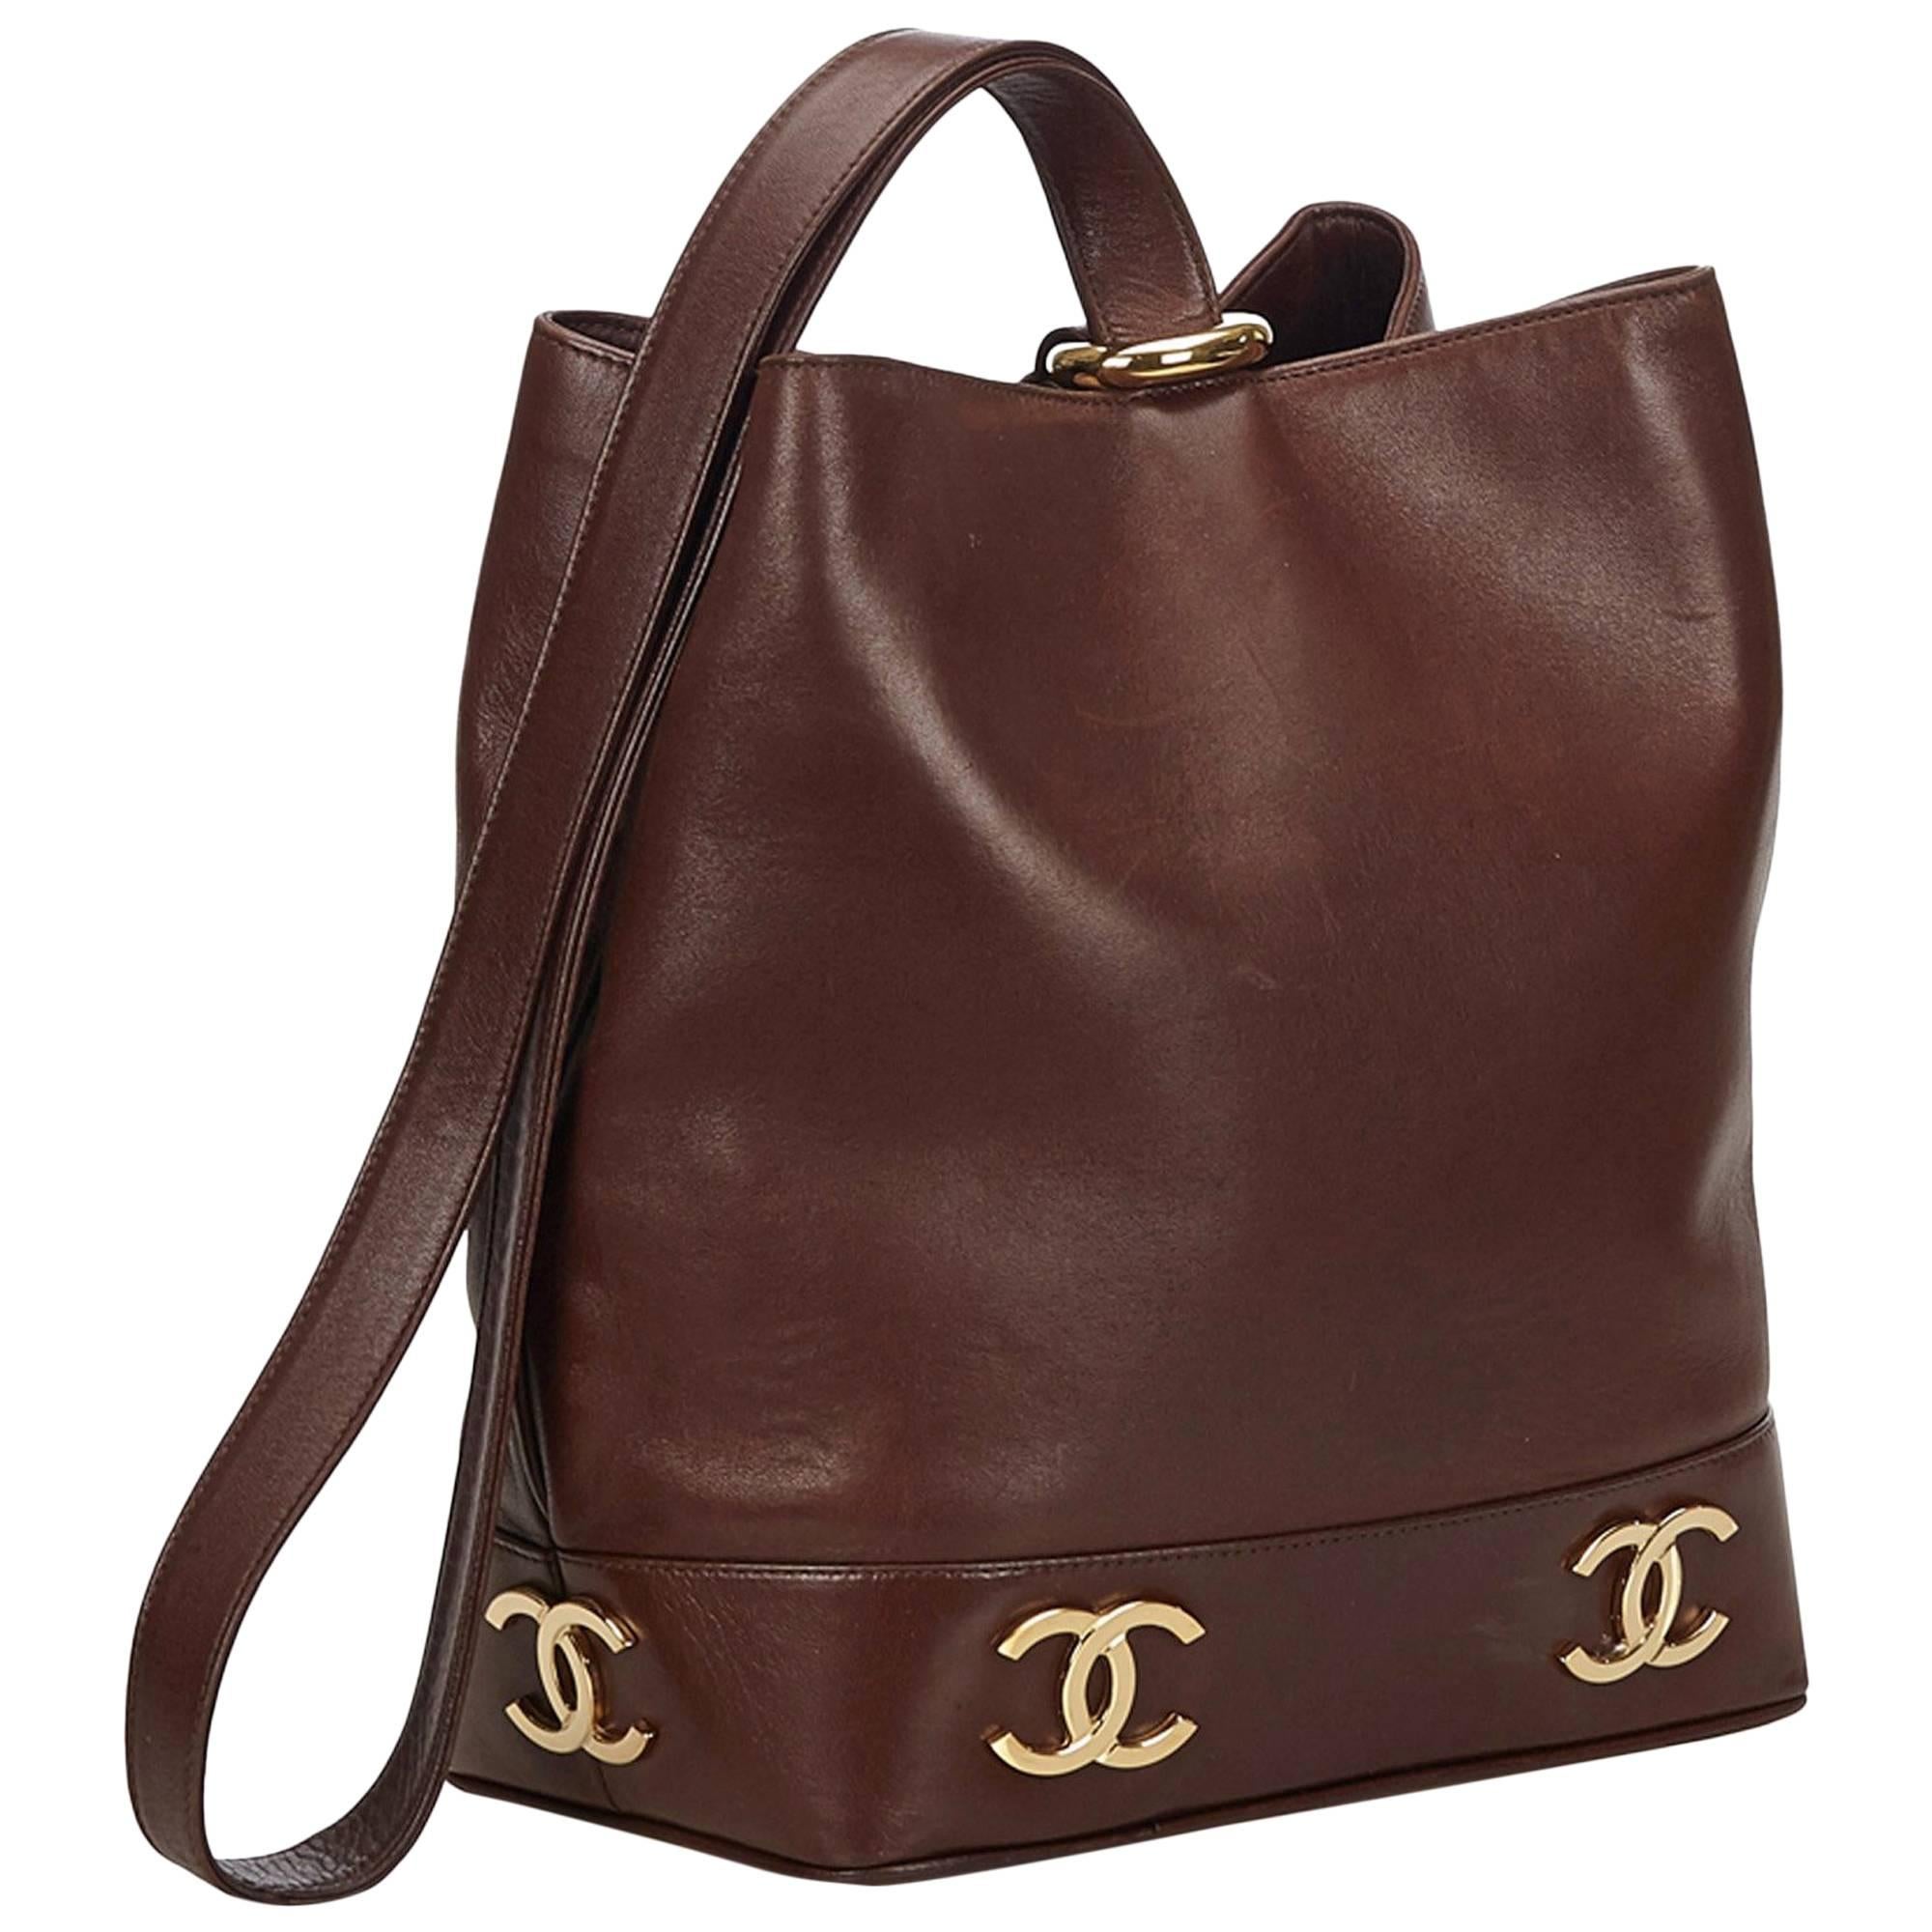 Chanel Brown Leather Gold Toned "CC" Bucket Bag